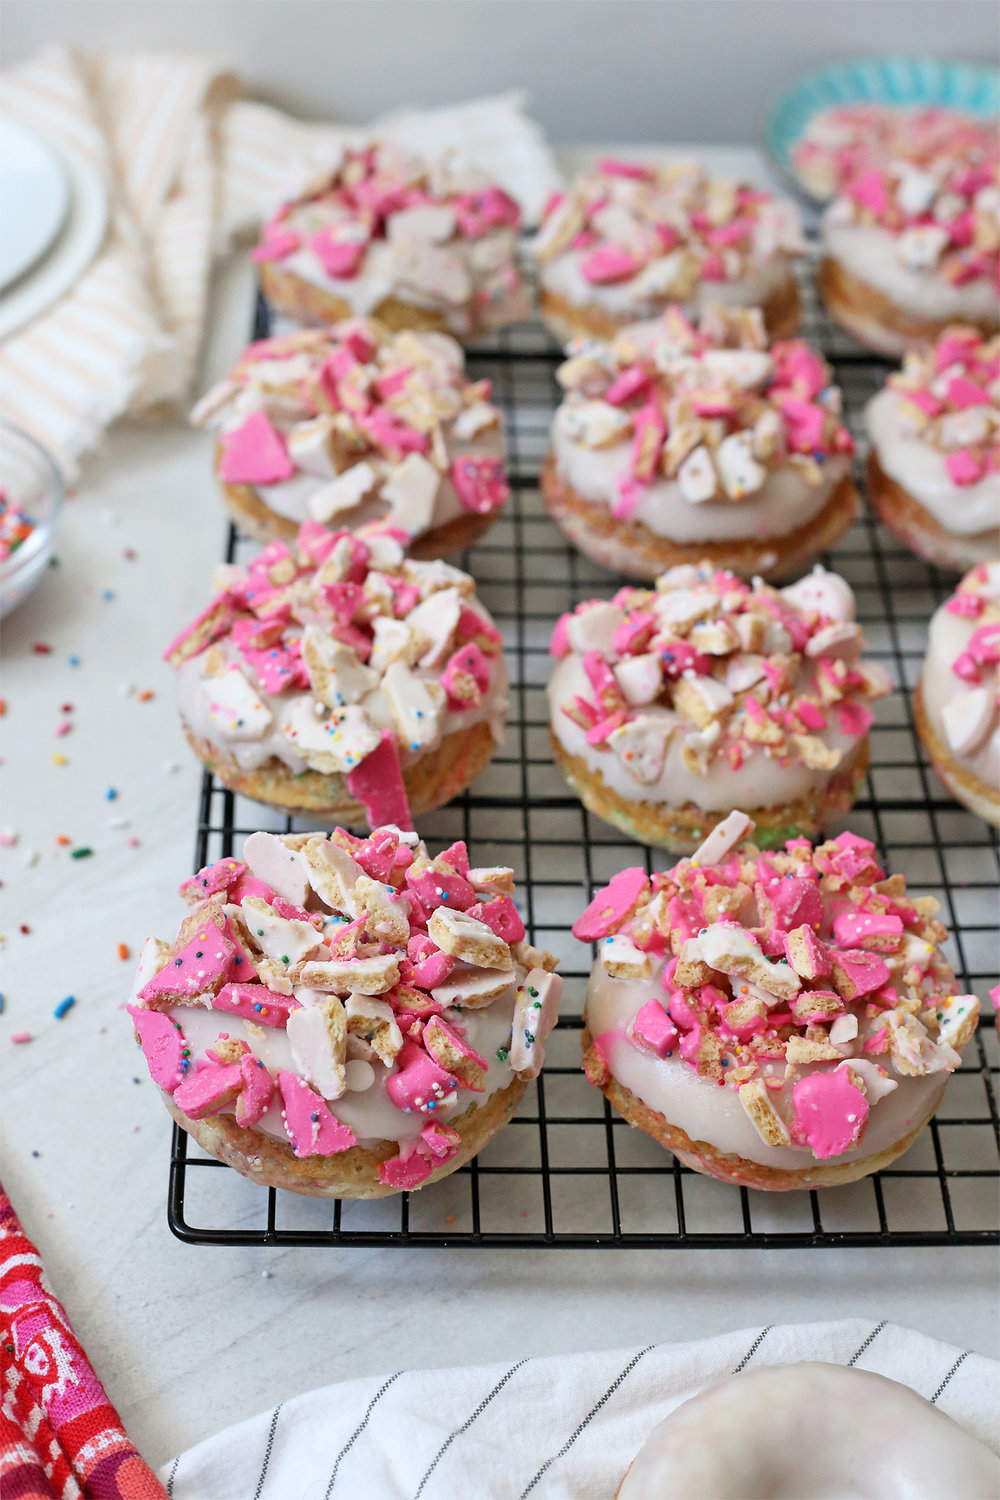 Funfetti Donuts topped with vanilla glaze and Frosted Animal Crackers. Unusuallylovely.com